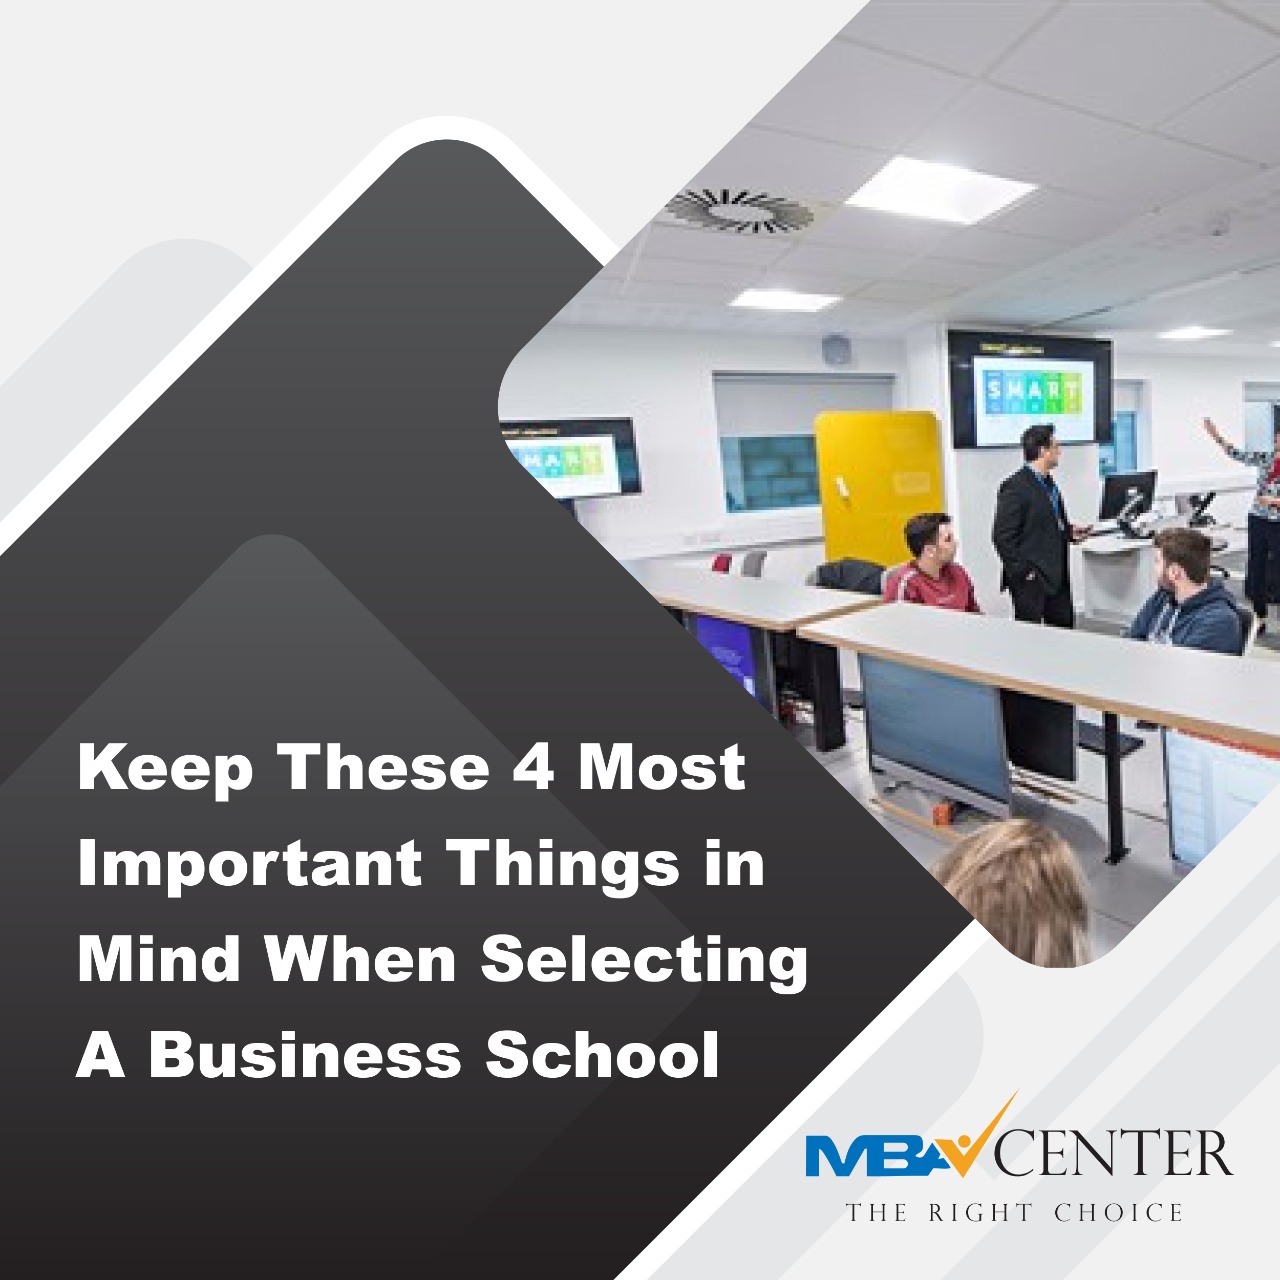 Keep These 3 Most Important Things in Mind When Selecting A Business School